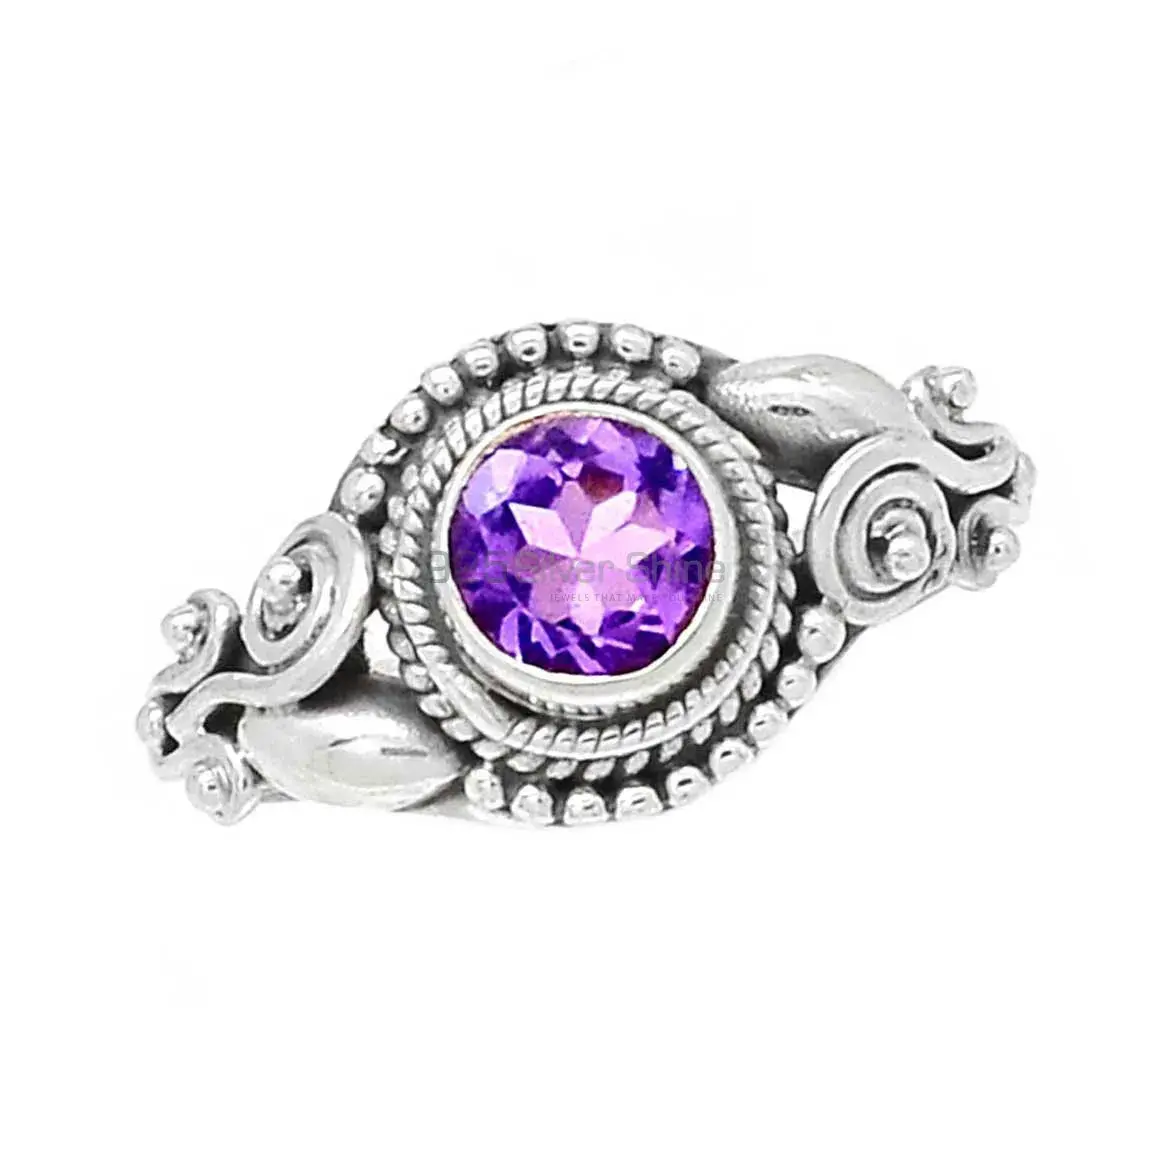 Faceted Amethyst Cut Stone Rings Jewelry 925SR2378_0